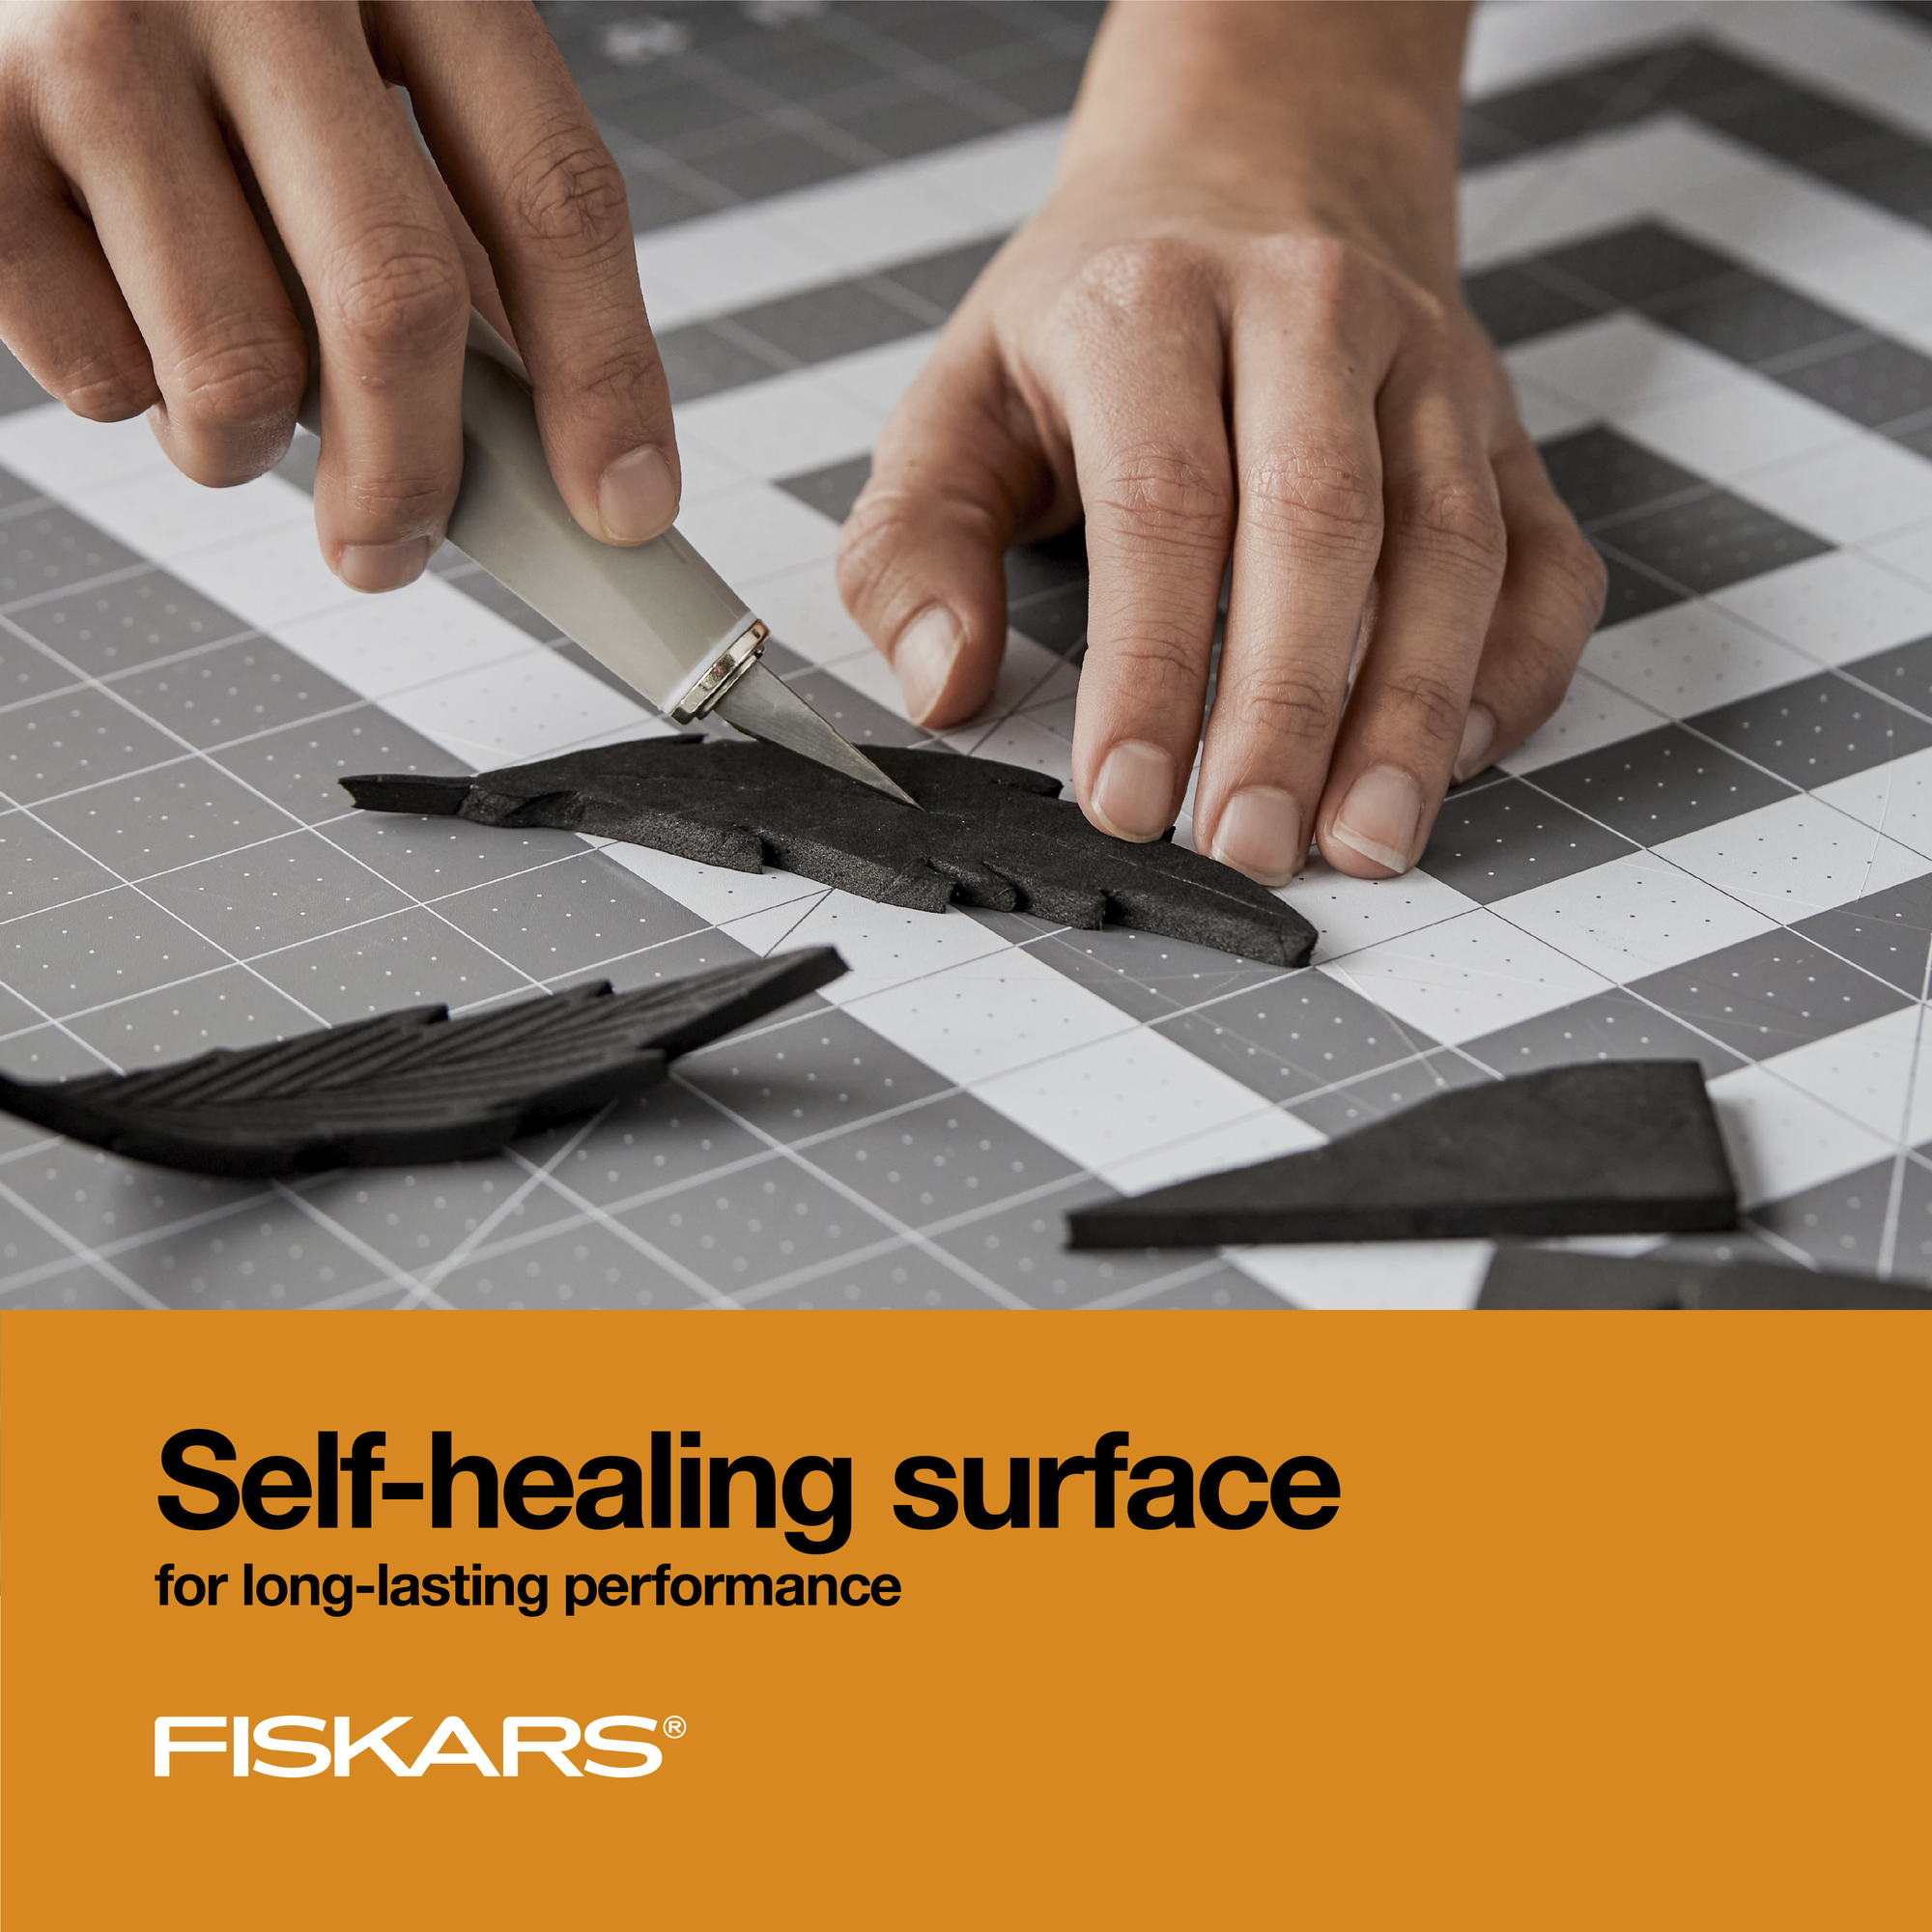 Fiskars 24" x 36" Self-Healing Double-Sided Cutting Mat, Gray and White - image 4 of 6